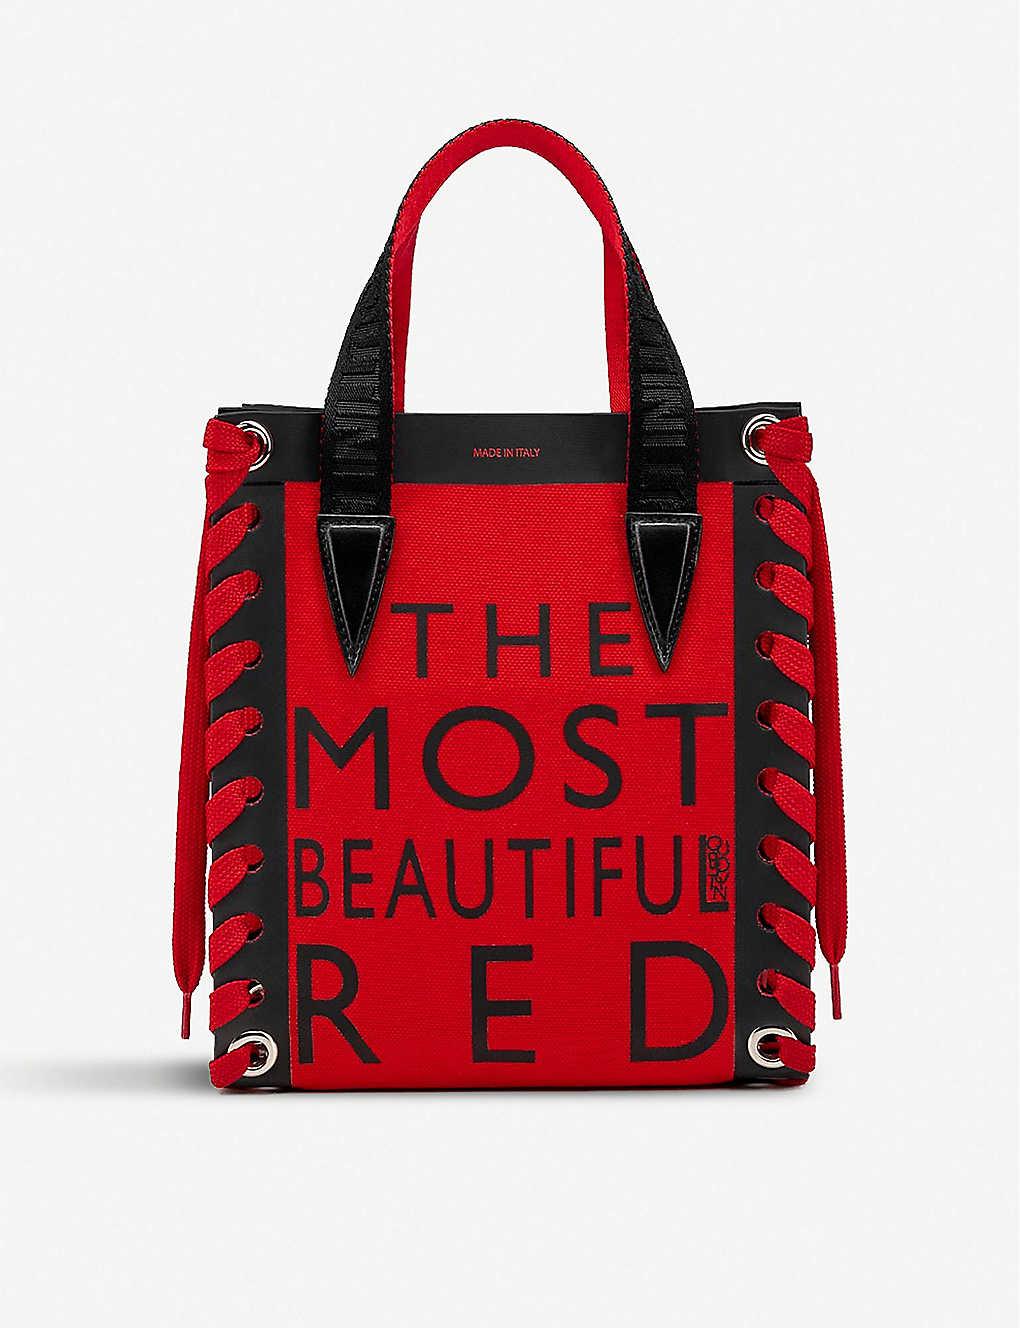 Is This the Most Photogenic Bag Ever?